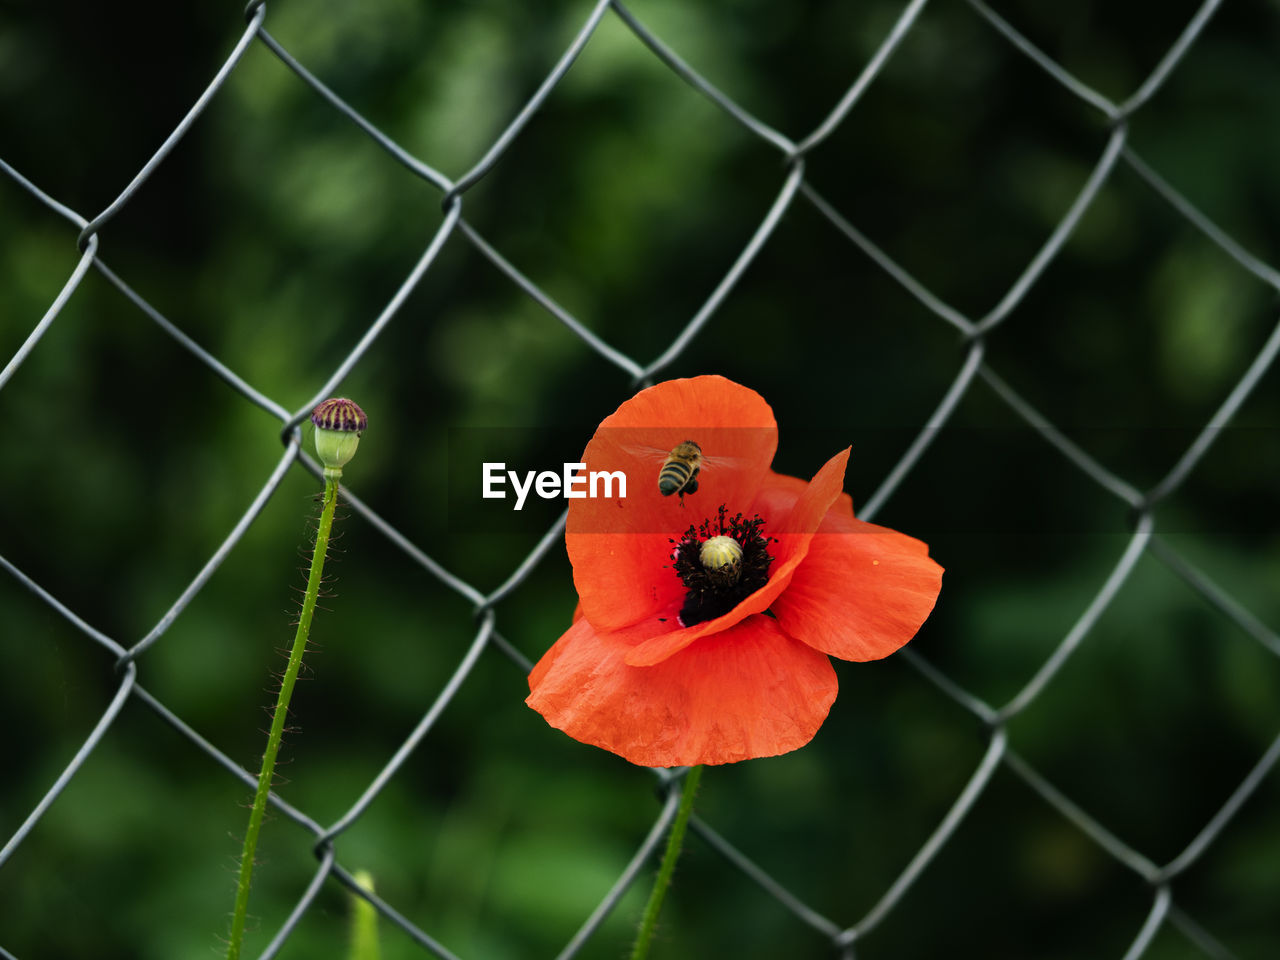 A bee pollinates a poppy growing on a background of a wire mesh fence